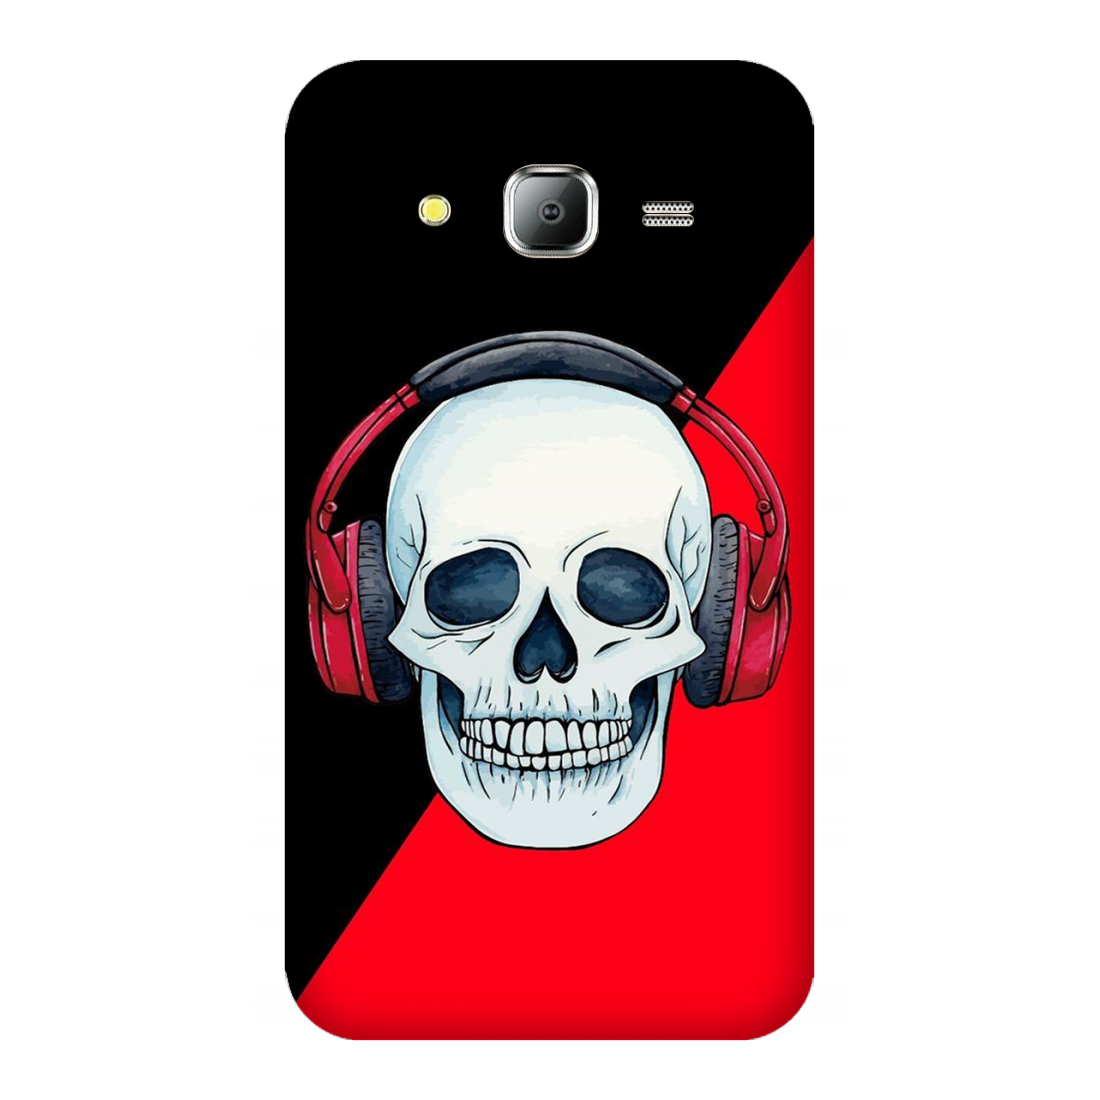 Red Headphones on Blurred Face Case Samsung Galaxy J7(2015)